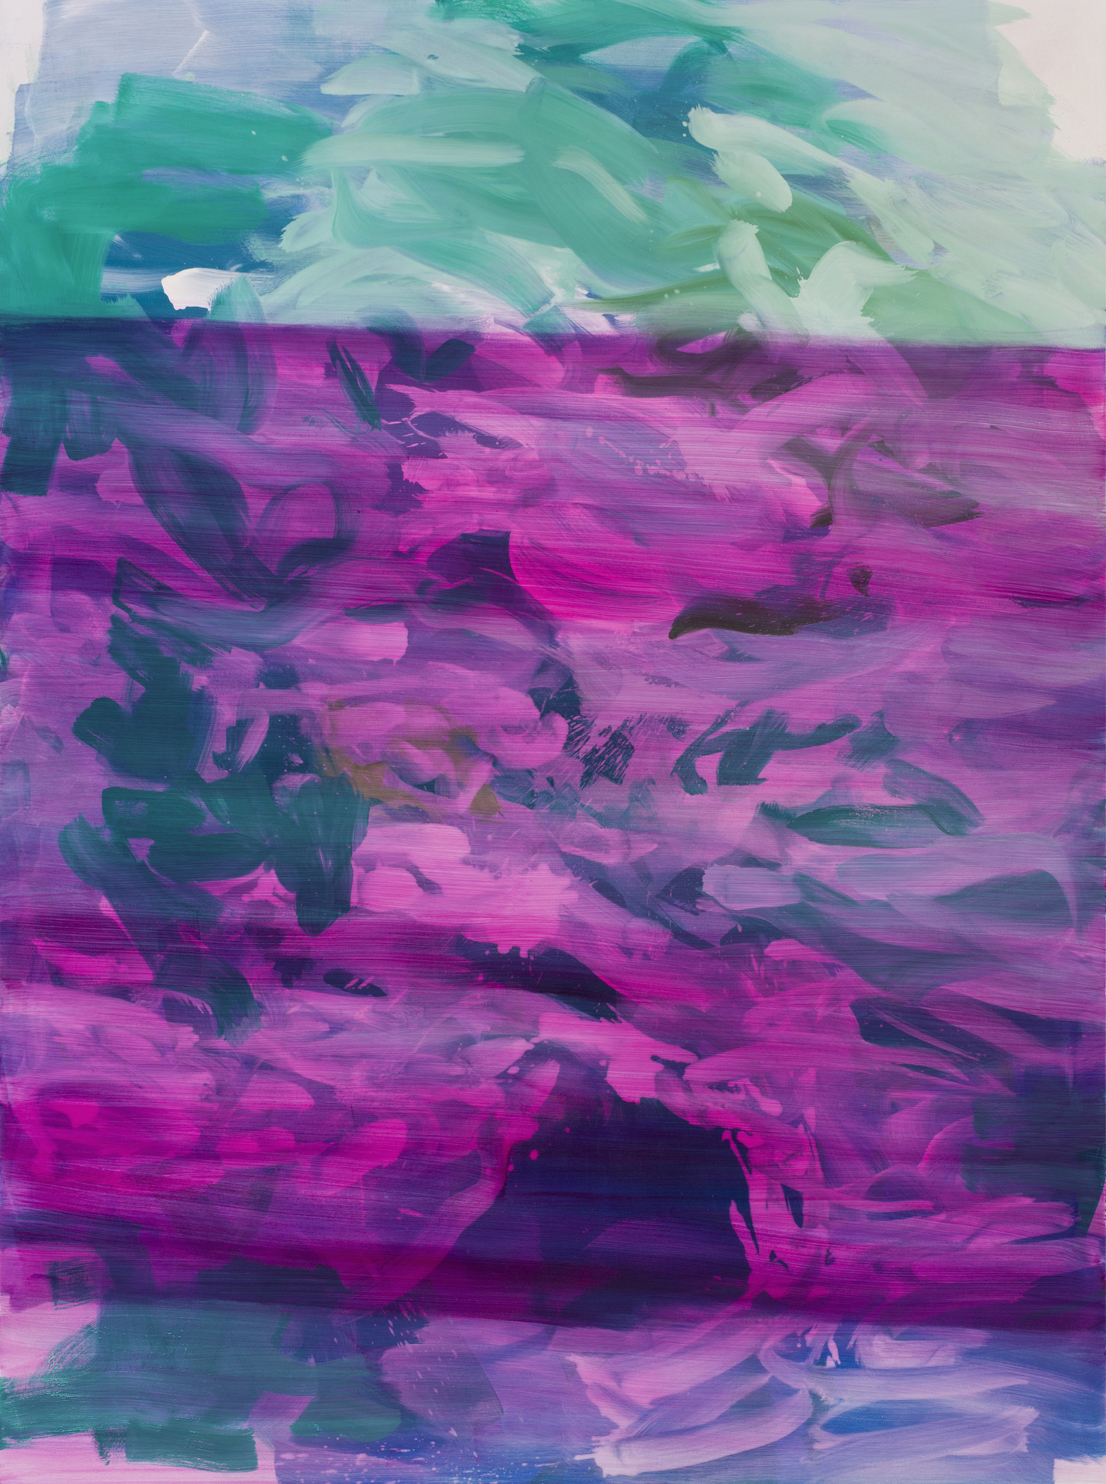  Untitled  (Magenta)  2017  Oil on canvas  199 x 148cm 